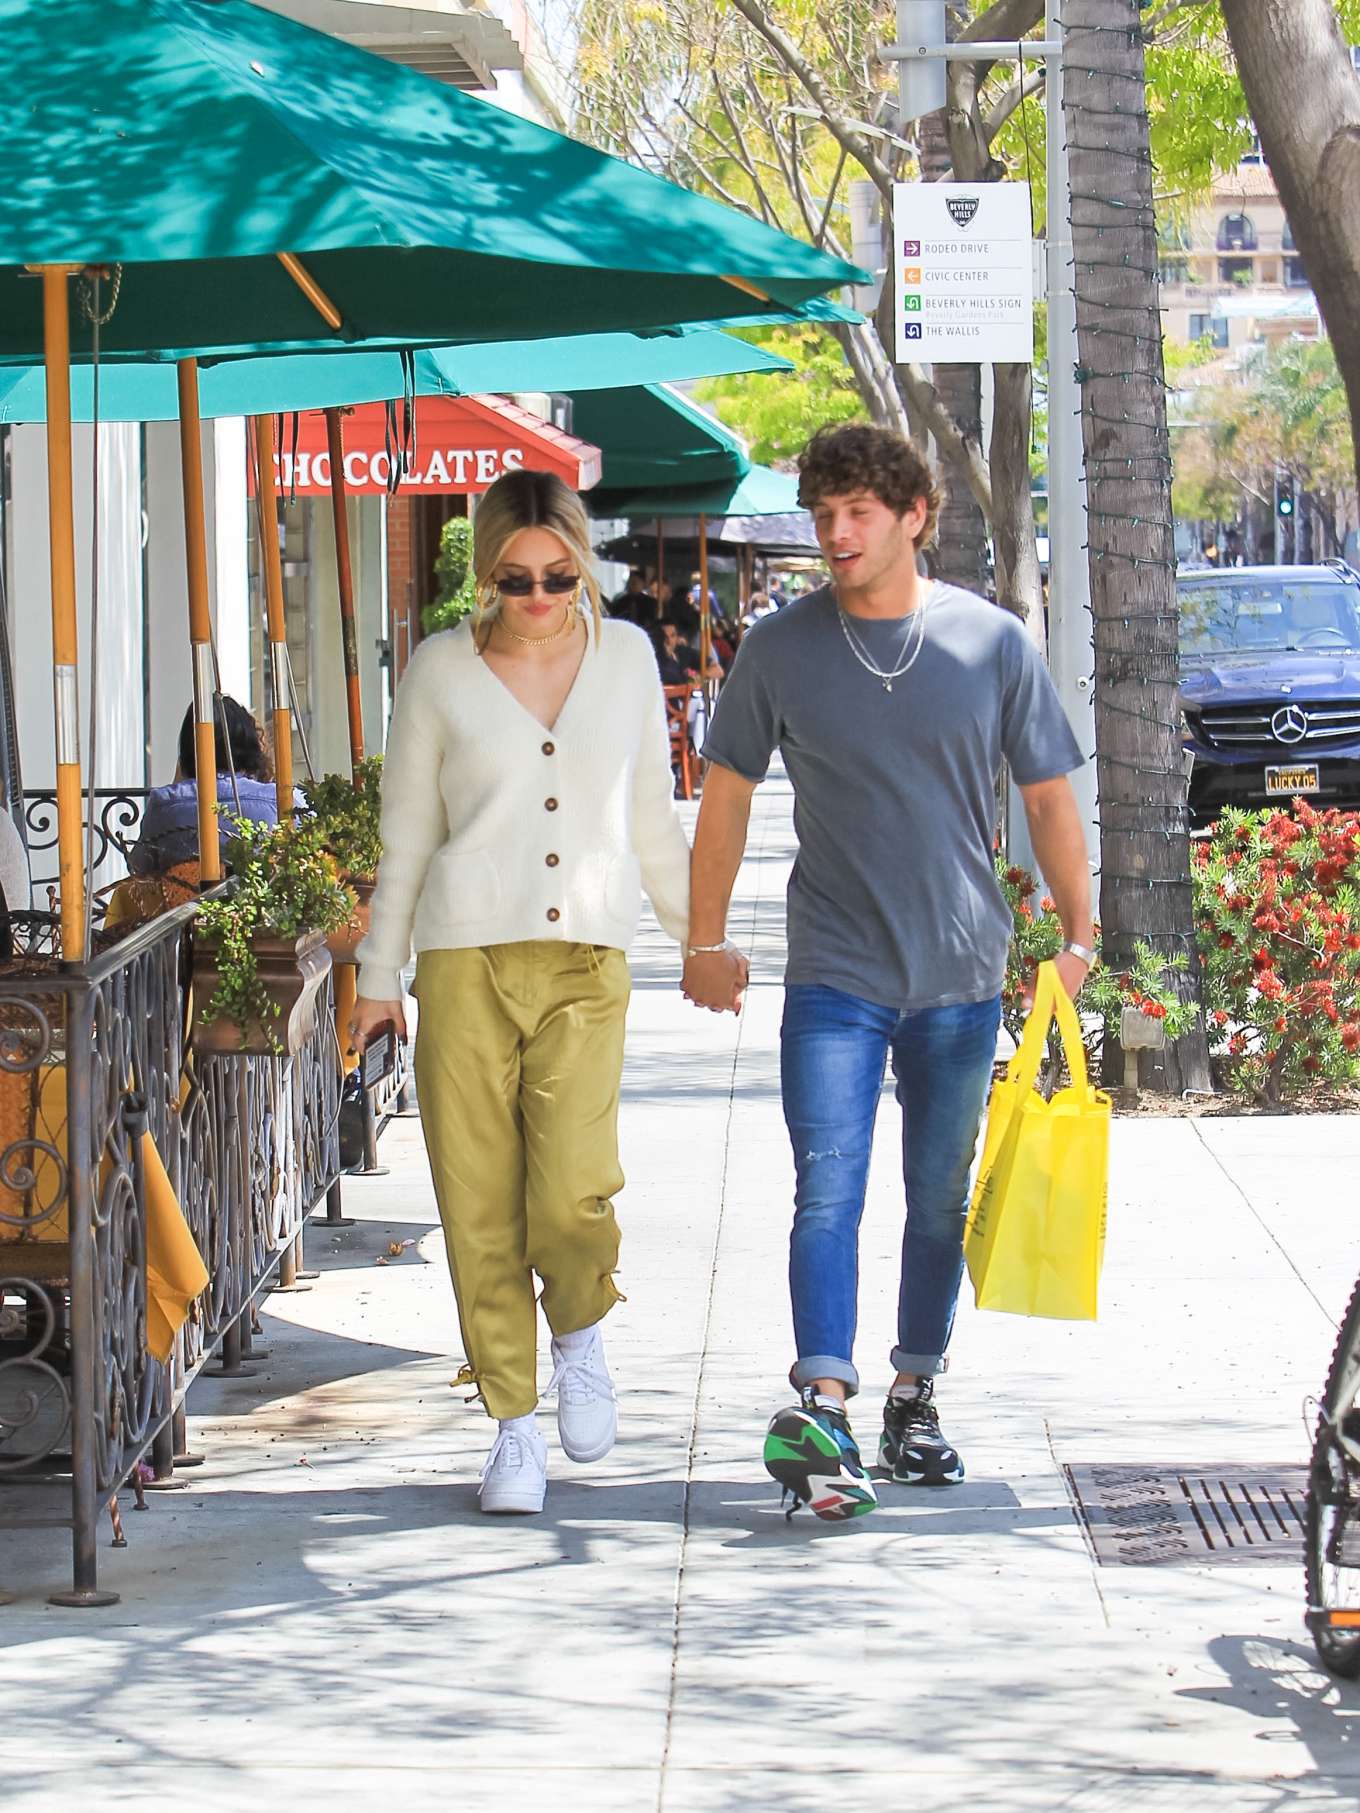 Delilah Hamlin and boyfriend out in Beverly Hills -01 | GotCeleb